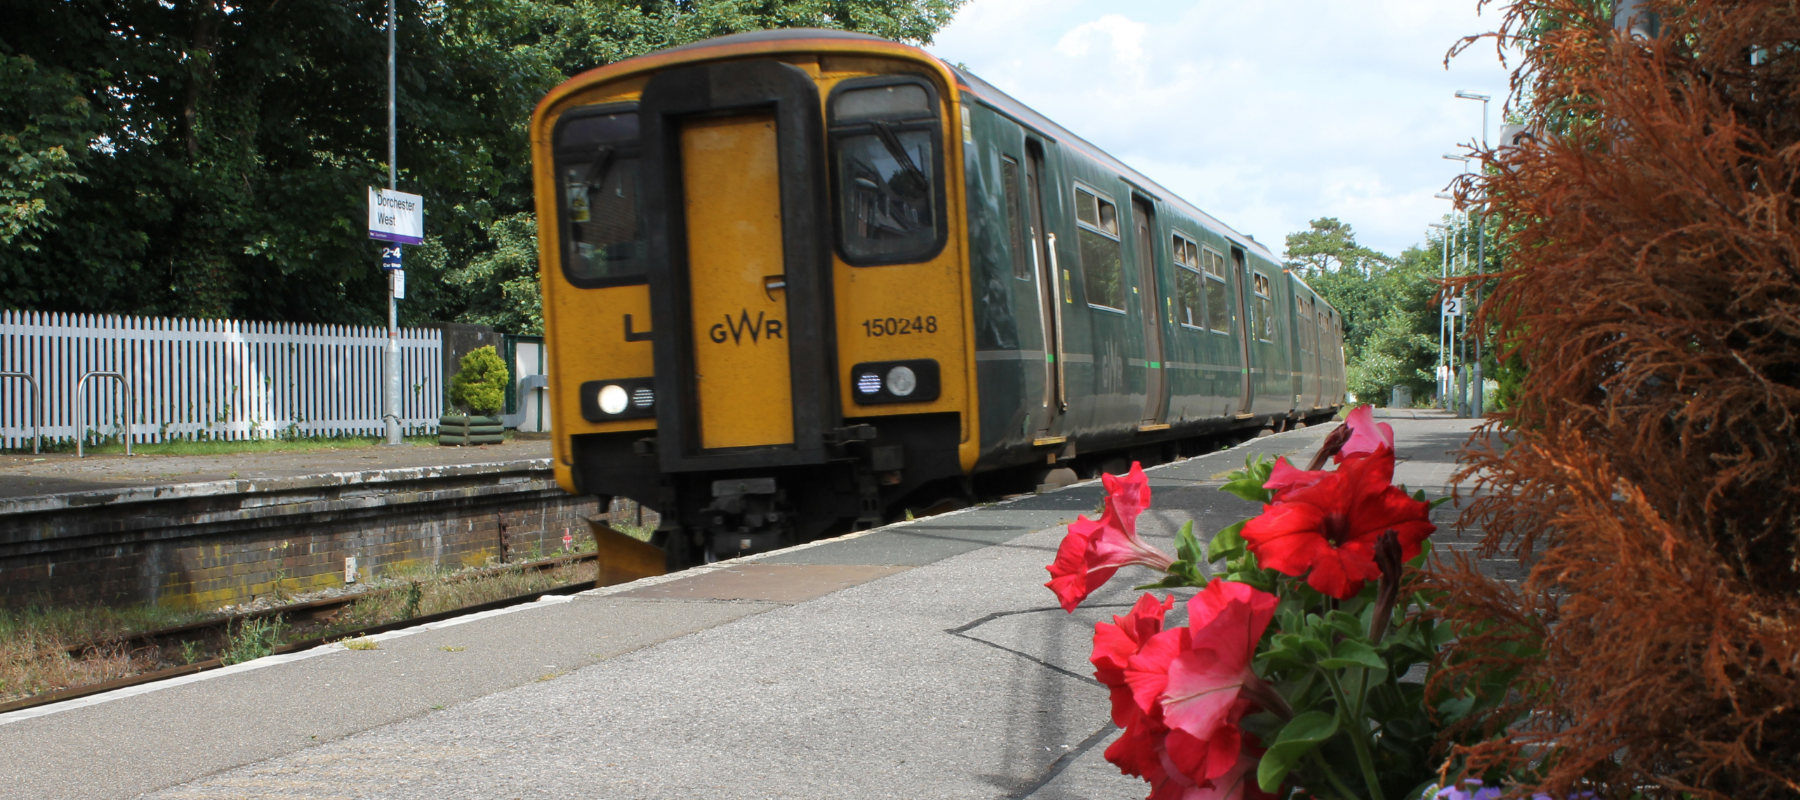 South Wessex train at Dorchester West Station